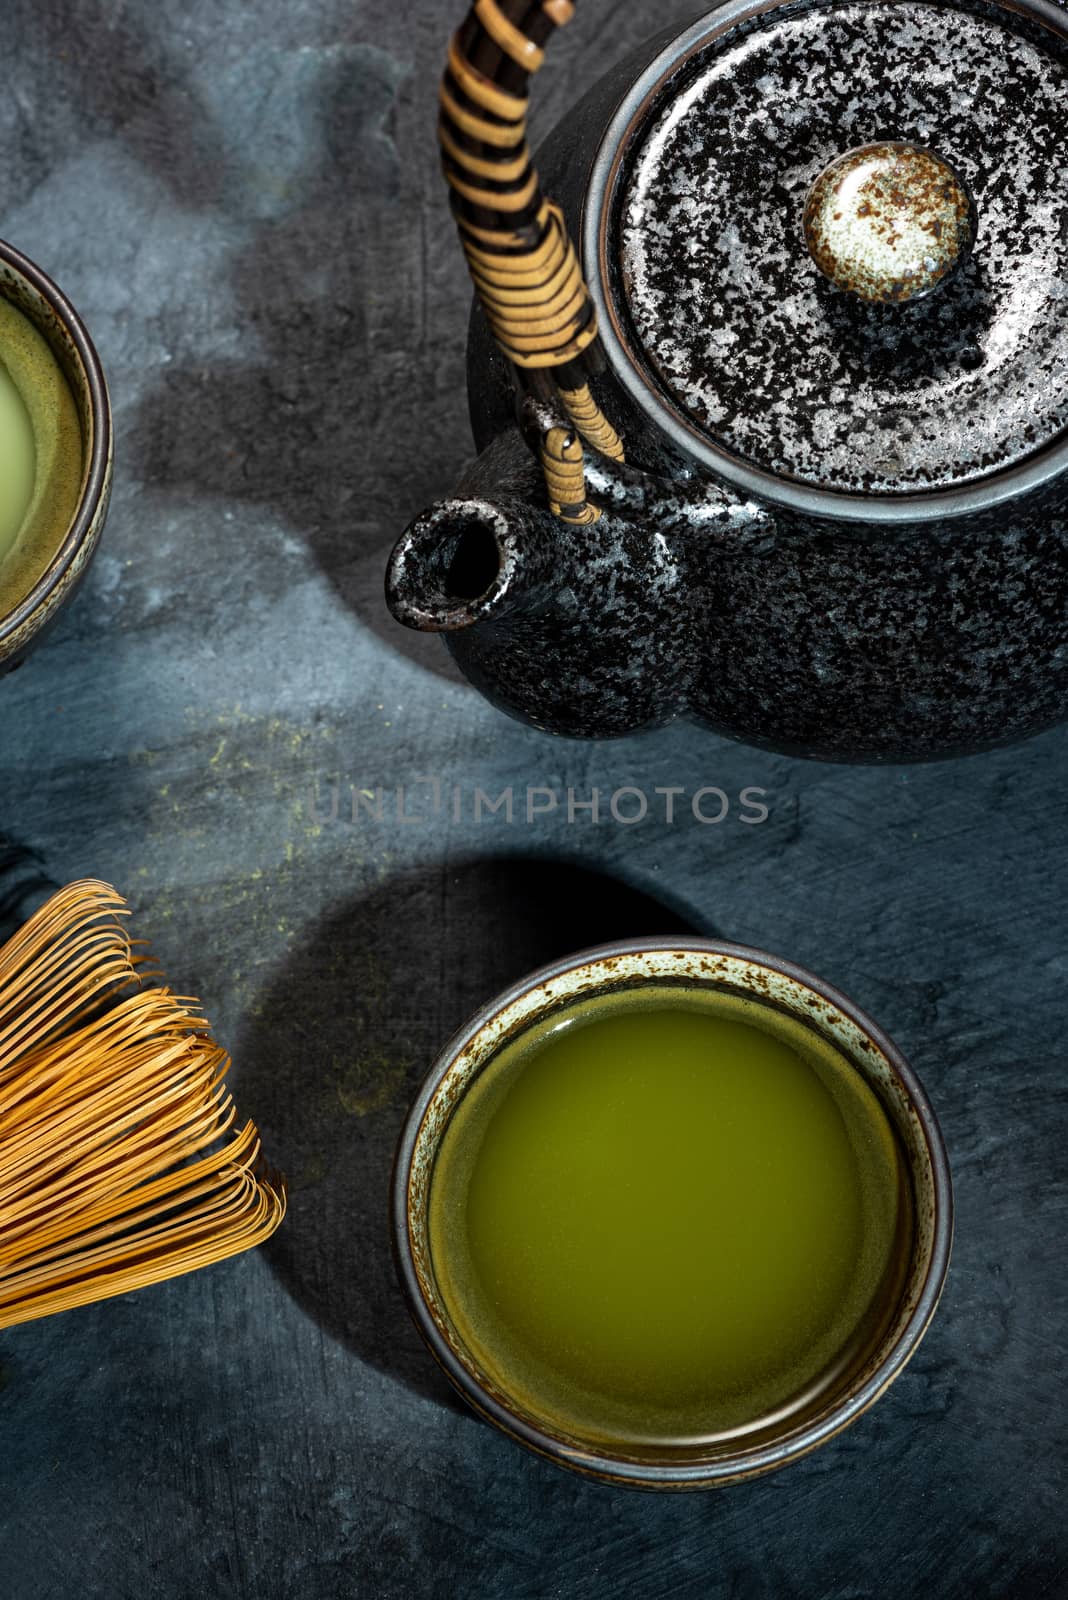 Matcha Green Tea in Bowl with Bamboo Whisk by merc67